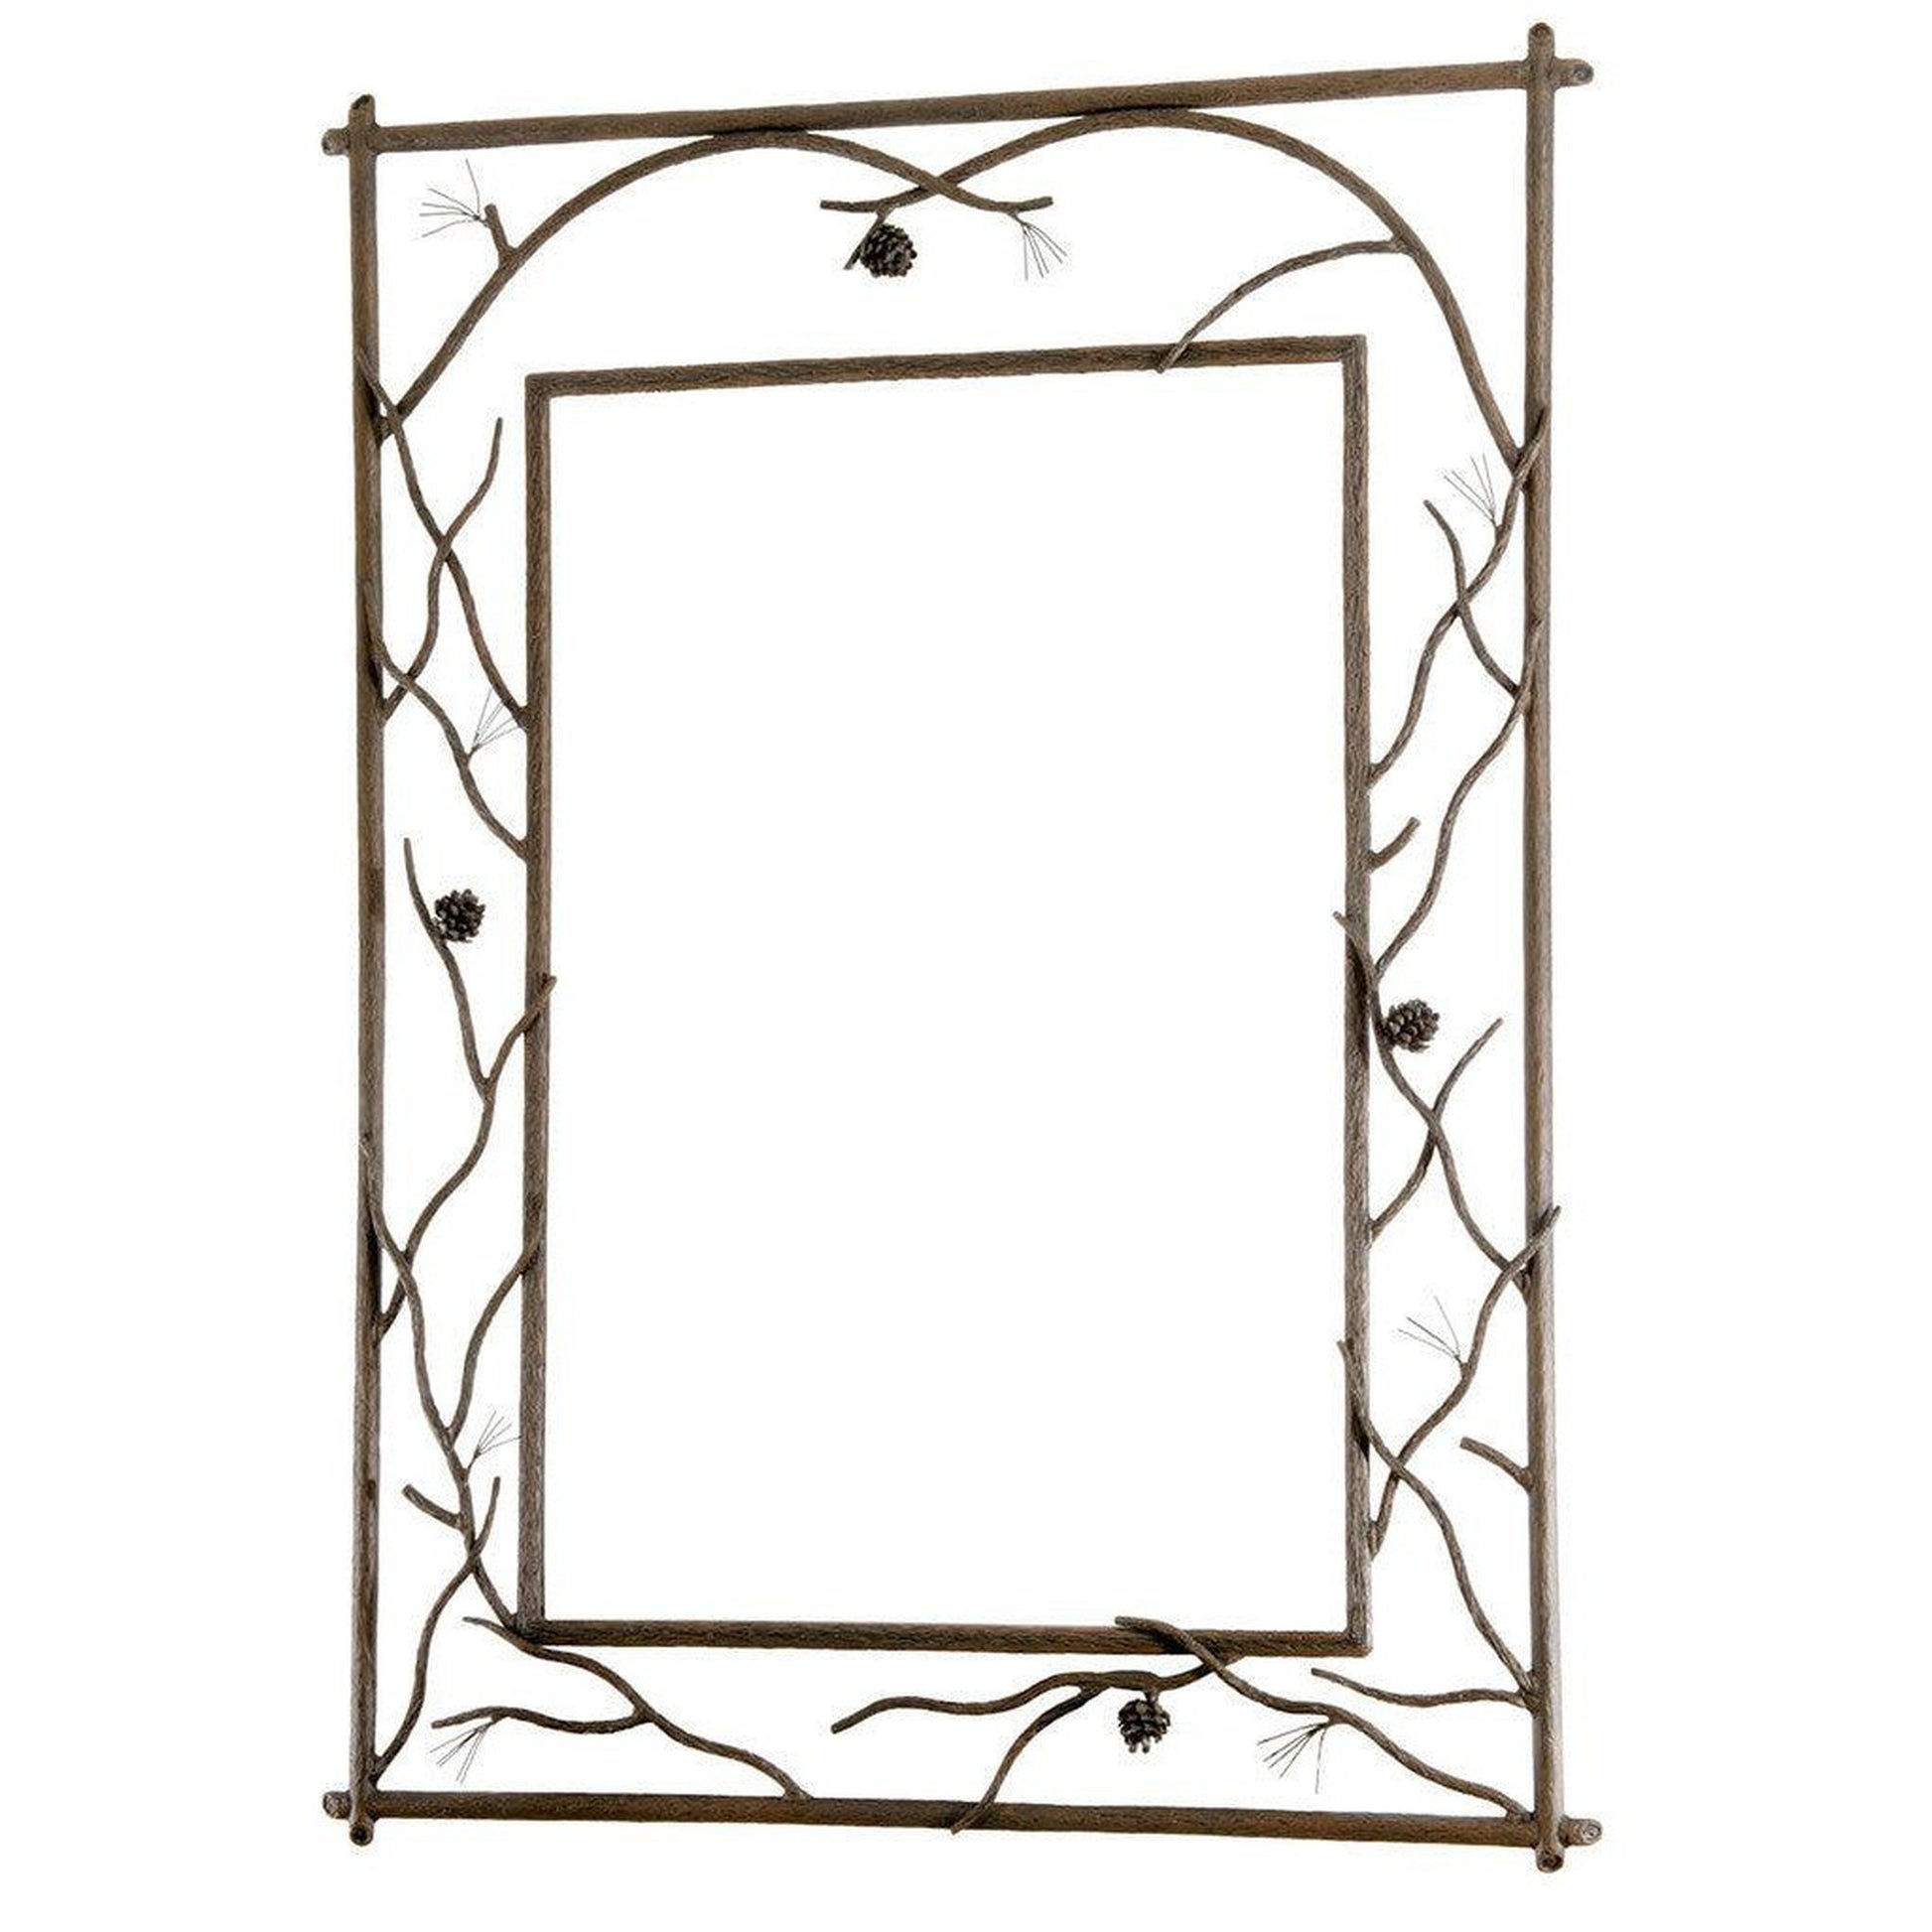 Stone County Ironworks Pine 37" x 51" Large Natural Bark Branched Iron Wall Mirror With Gold Iron Accent